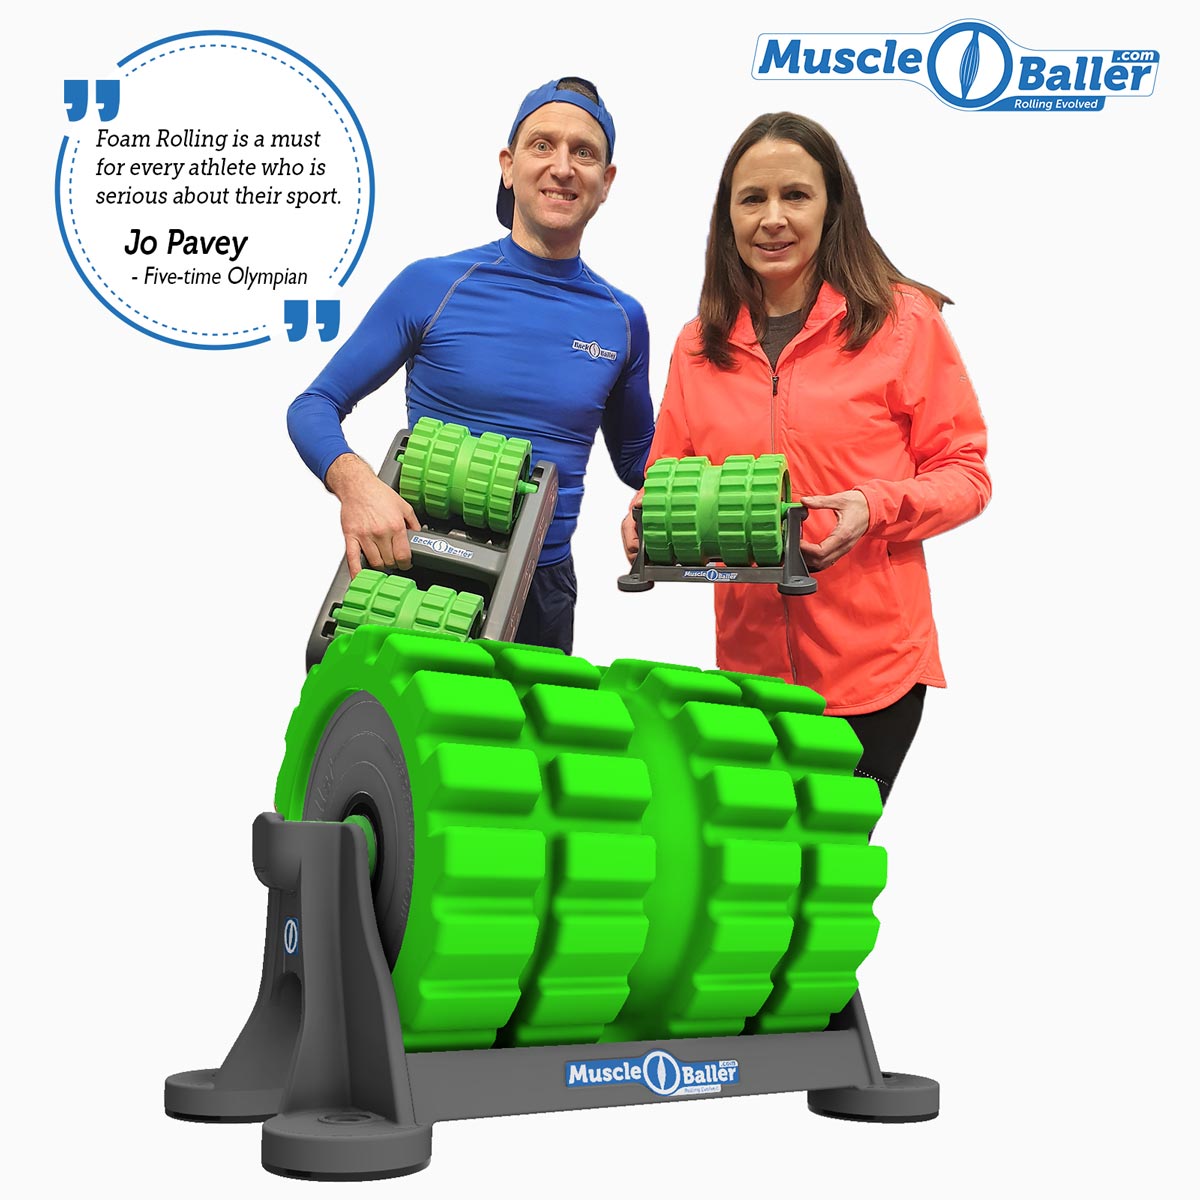 Jo Pavey - Foam Rolling is a must for every athlete who is serious about their sport